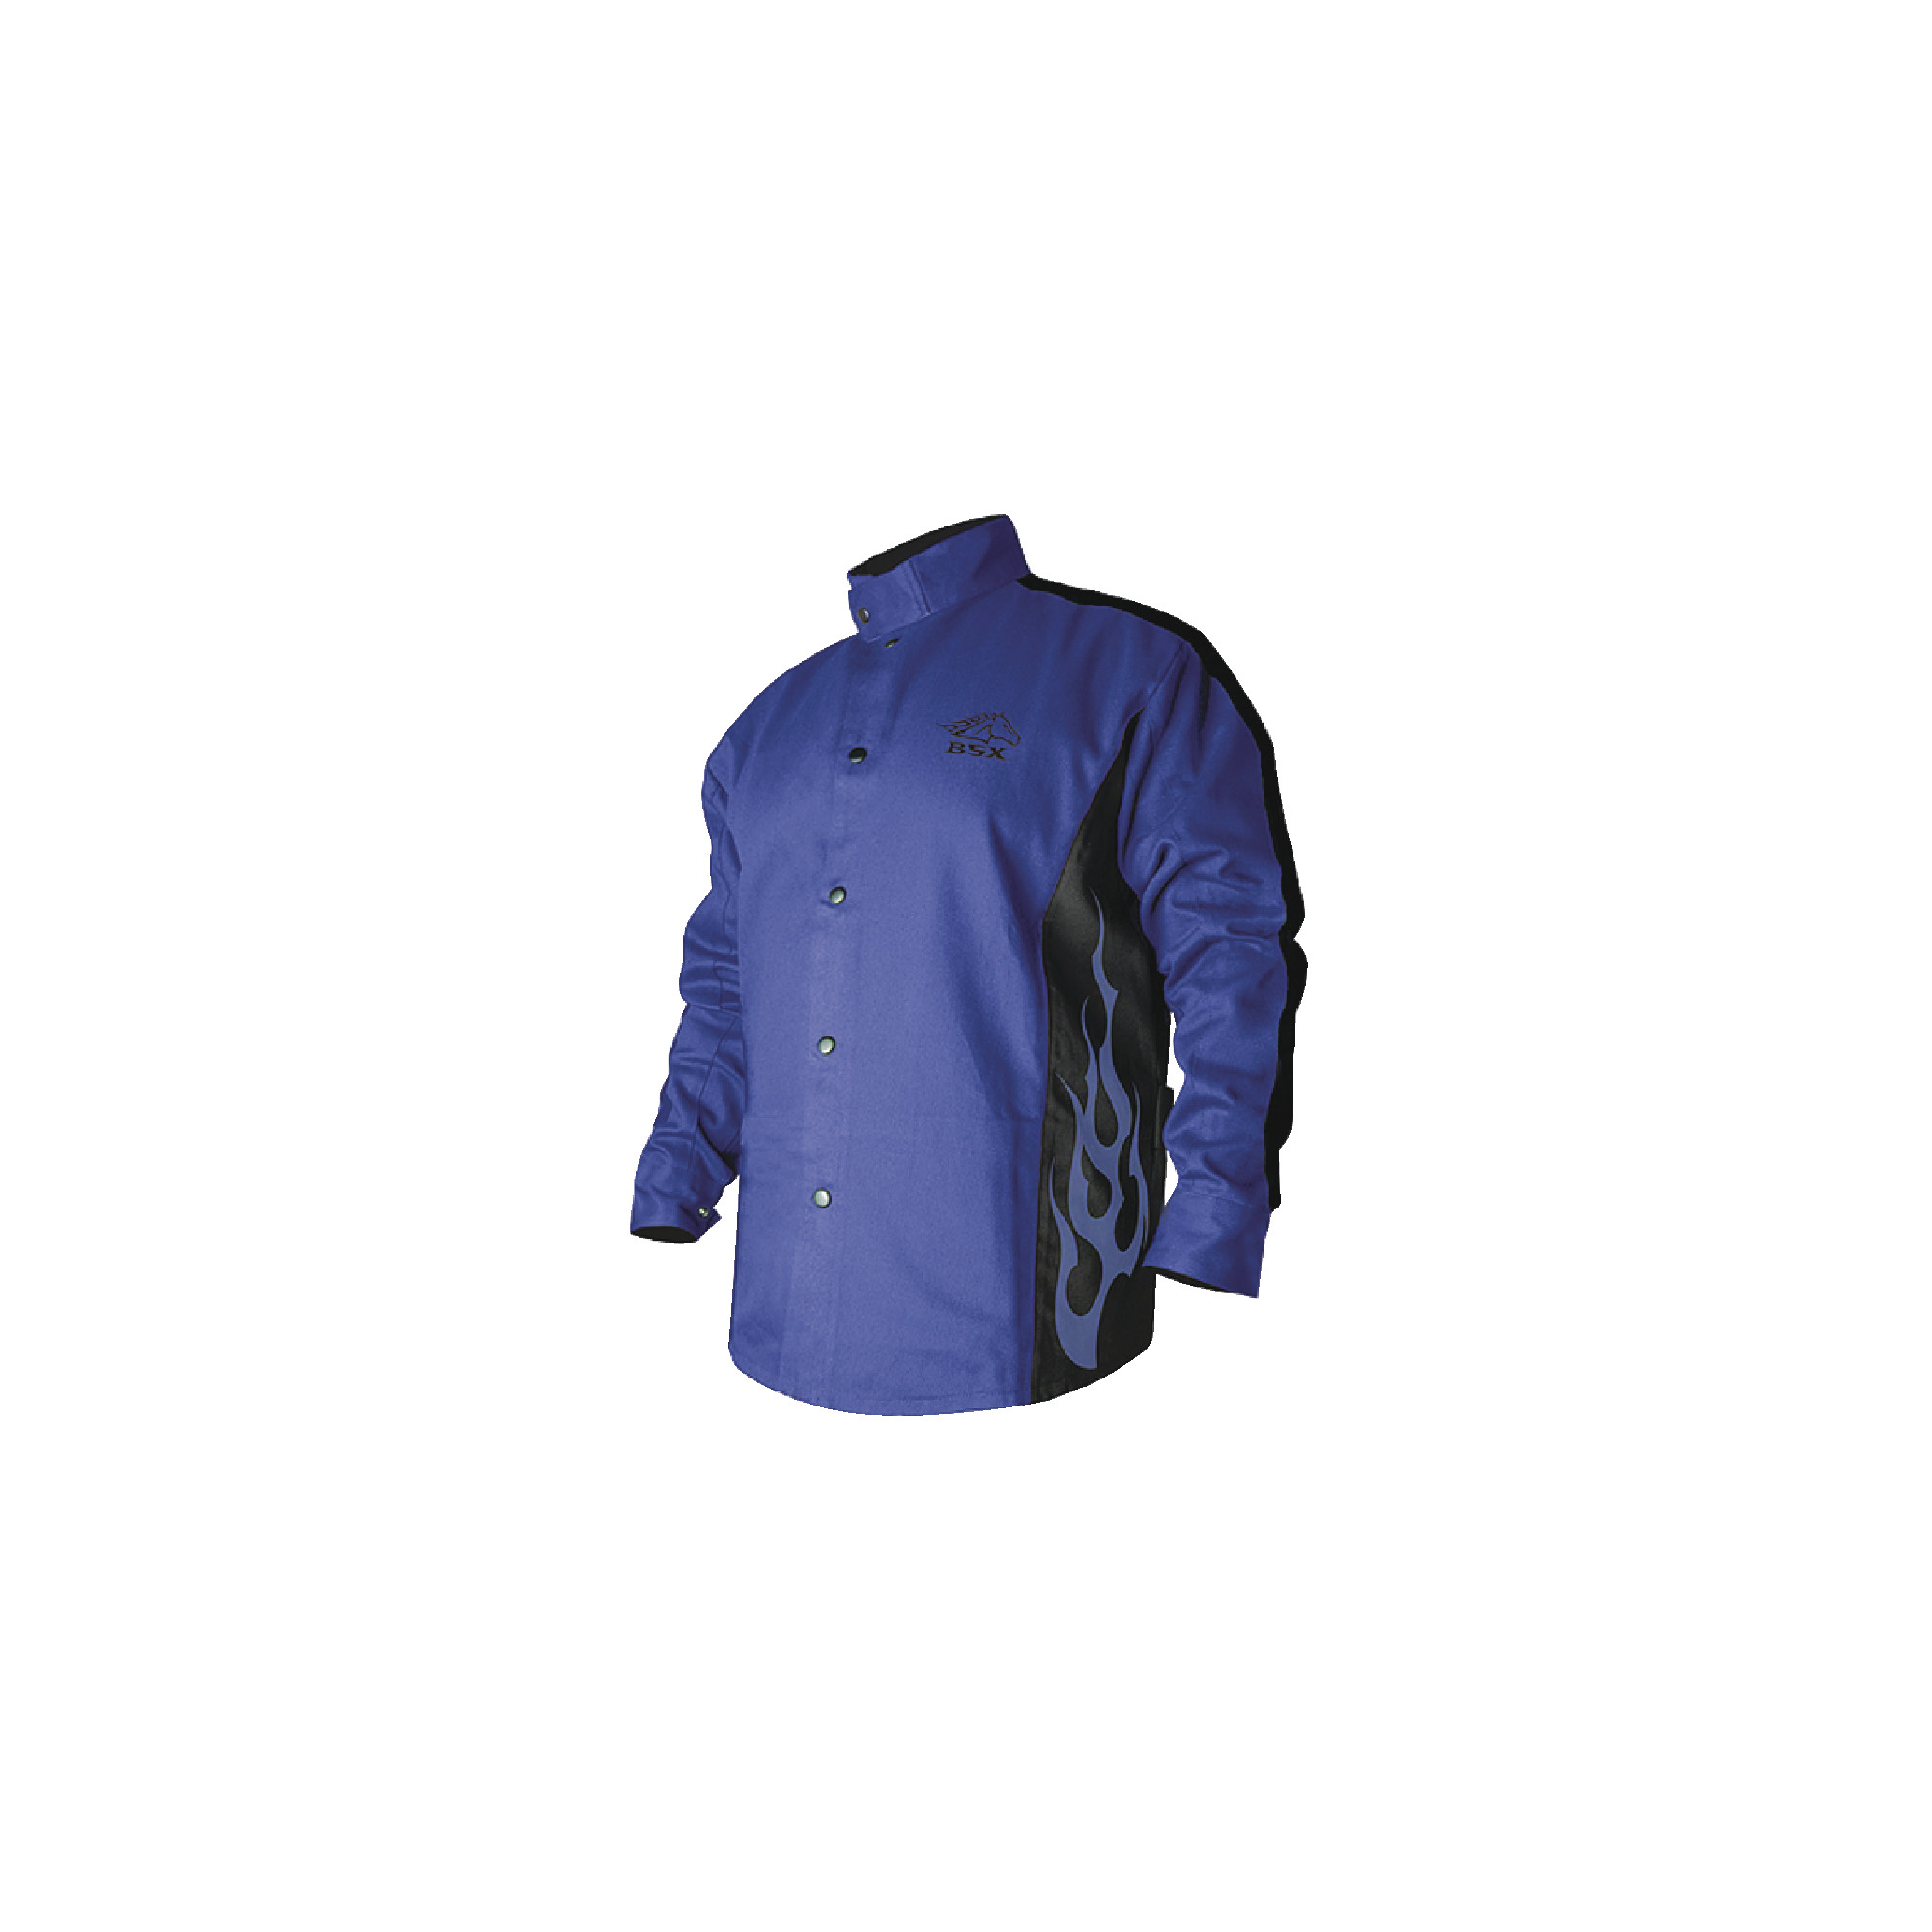 BSX Stryker Blue With Blue Flames Fire Resistant Welding Jacket - Size M